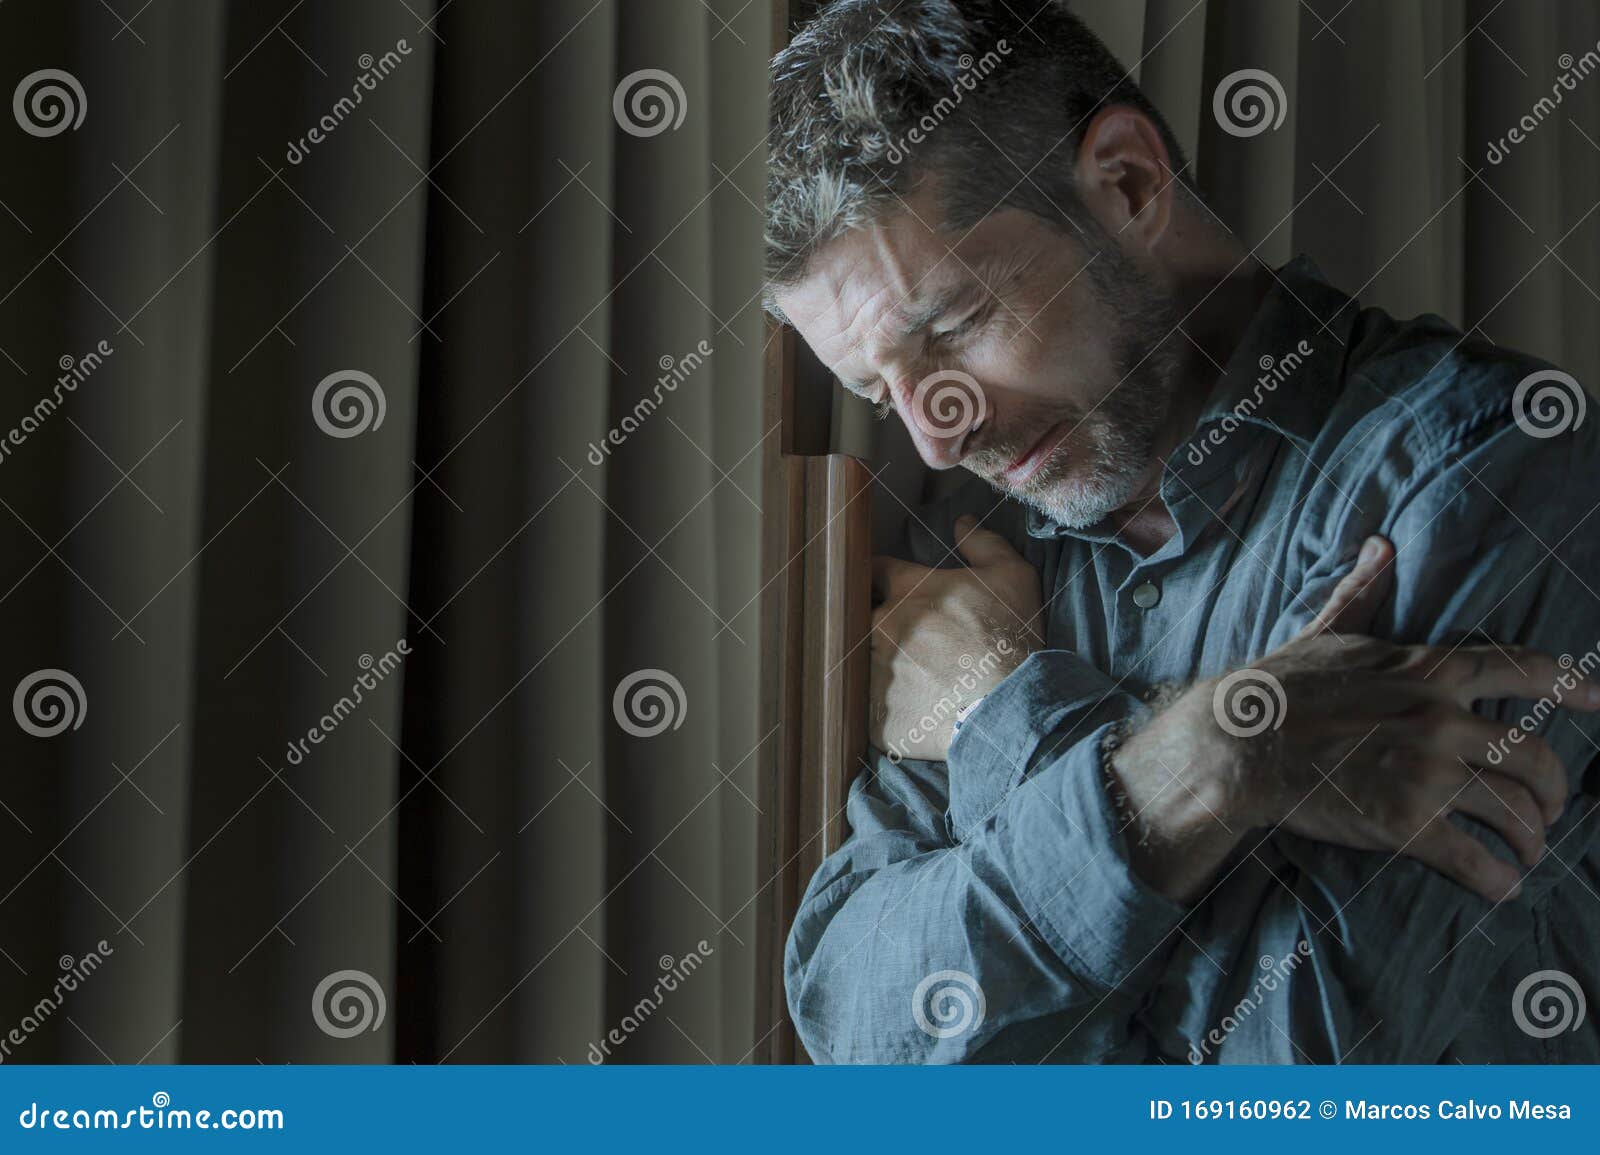 dramatic portrait of depressed and sick man suffering from psychosis illness or mental disorder looking weird and helpless in